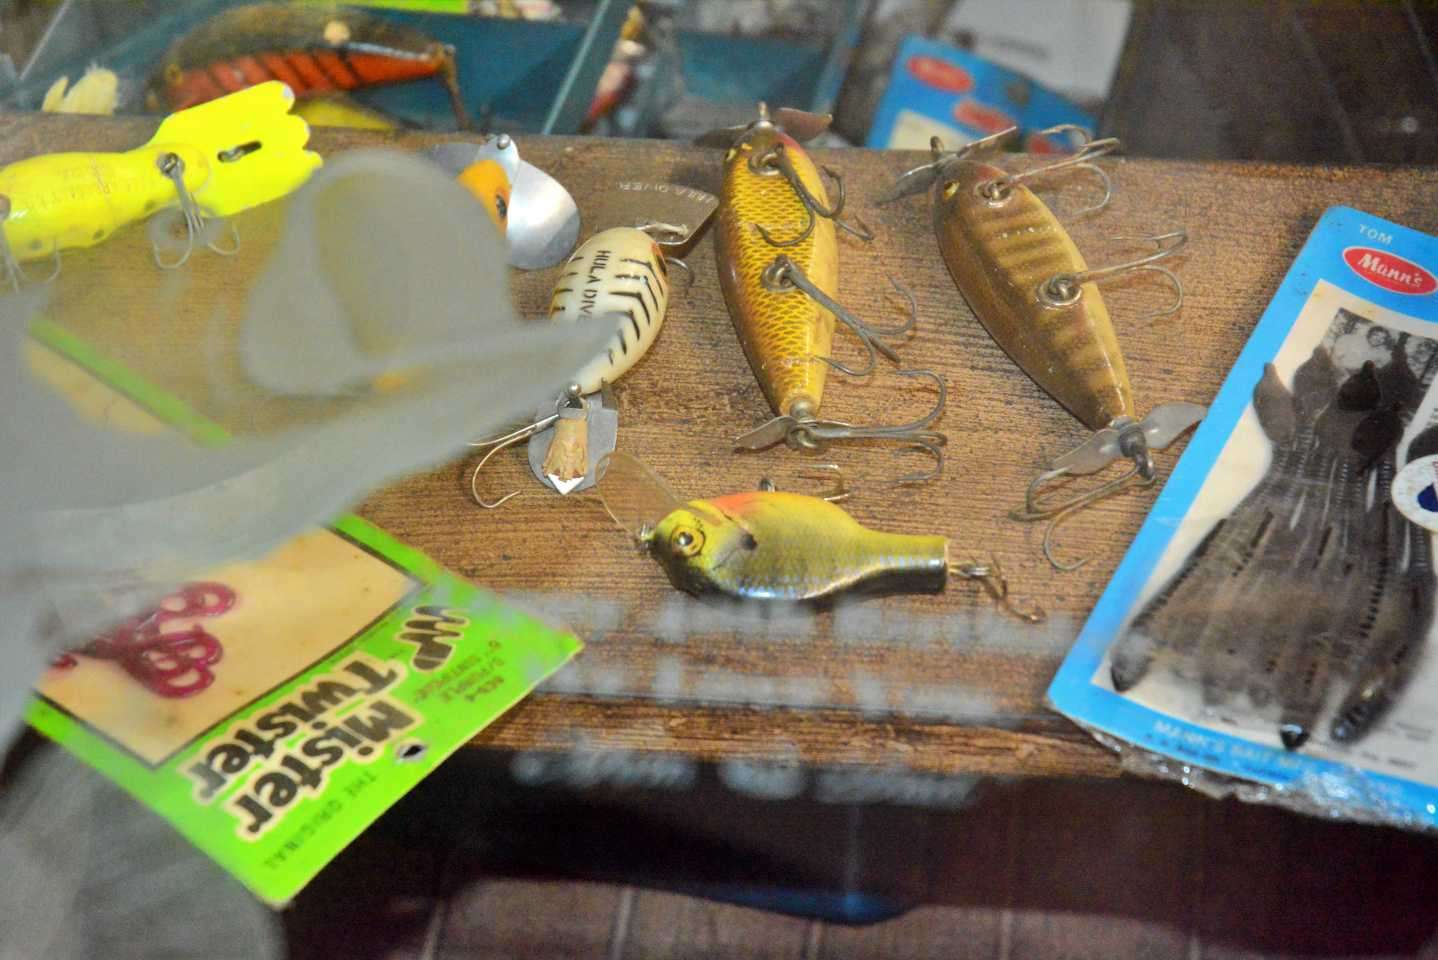 Lures are artistically placed inside the table to bring back fond memories.